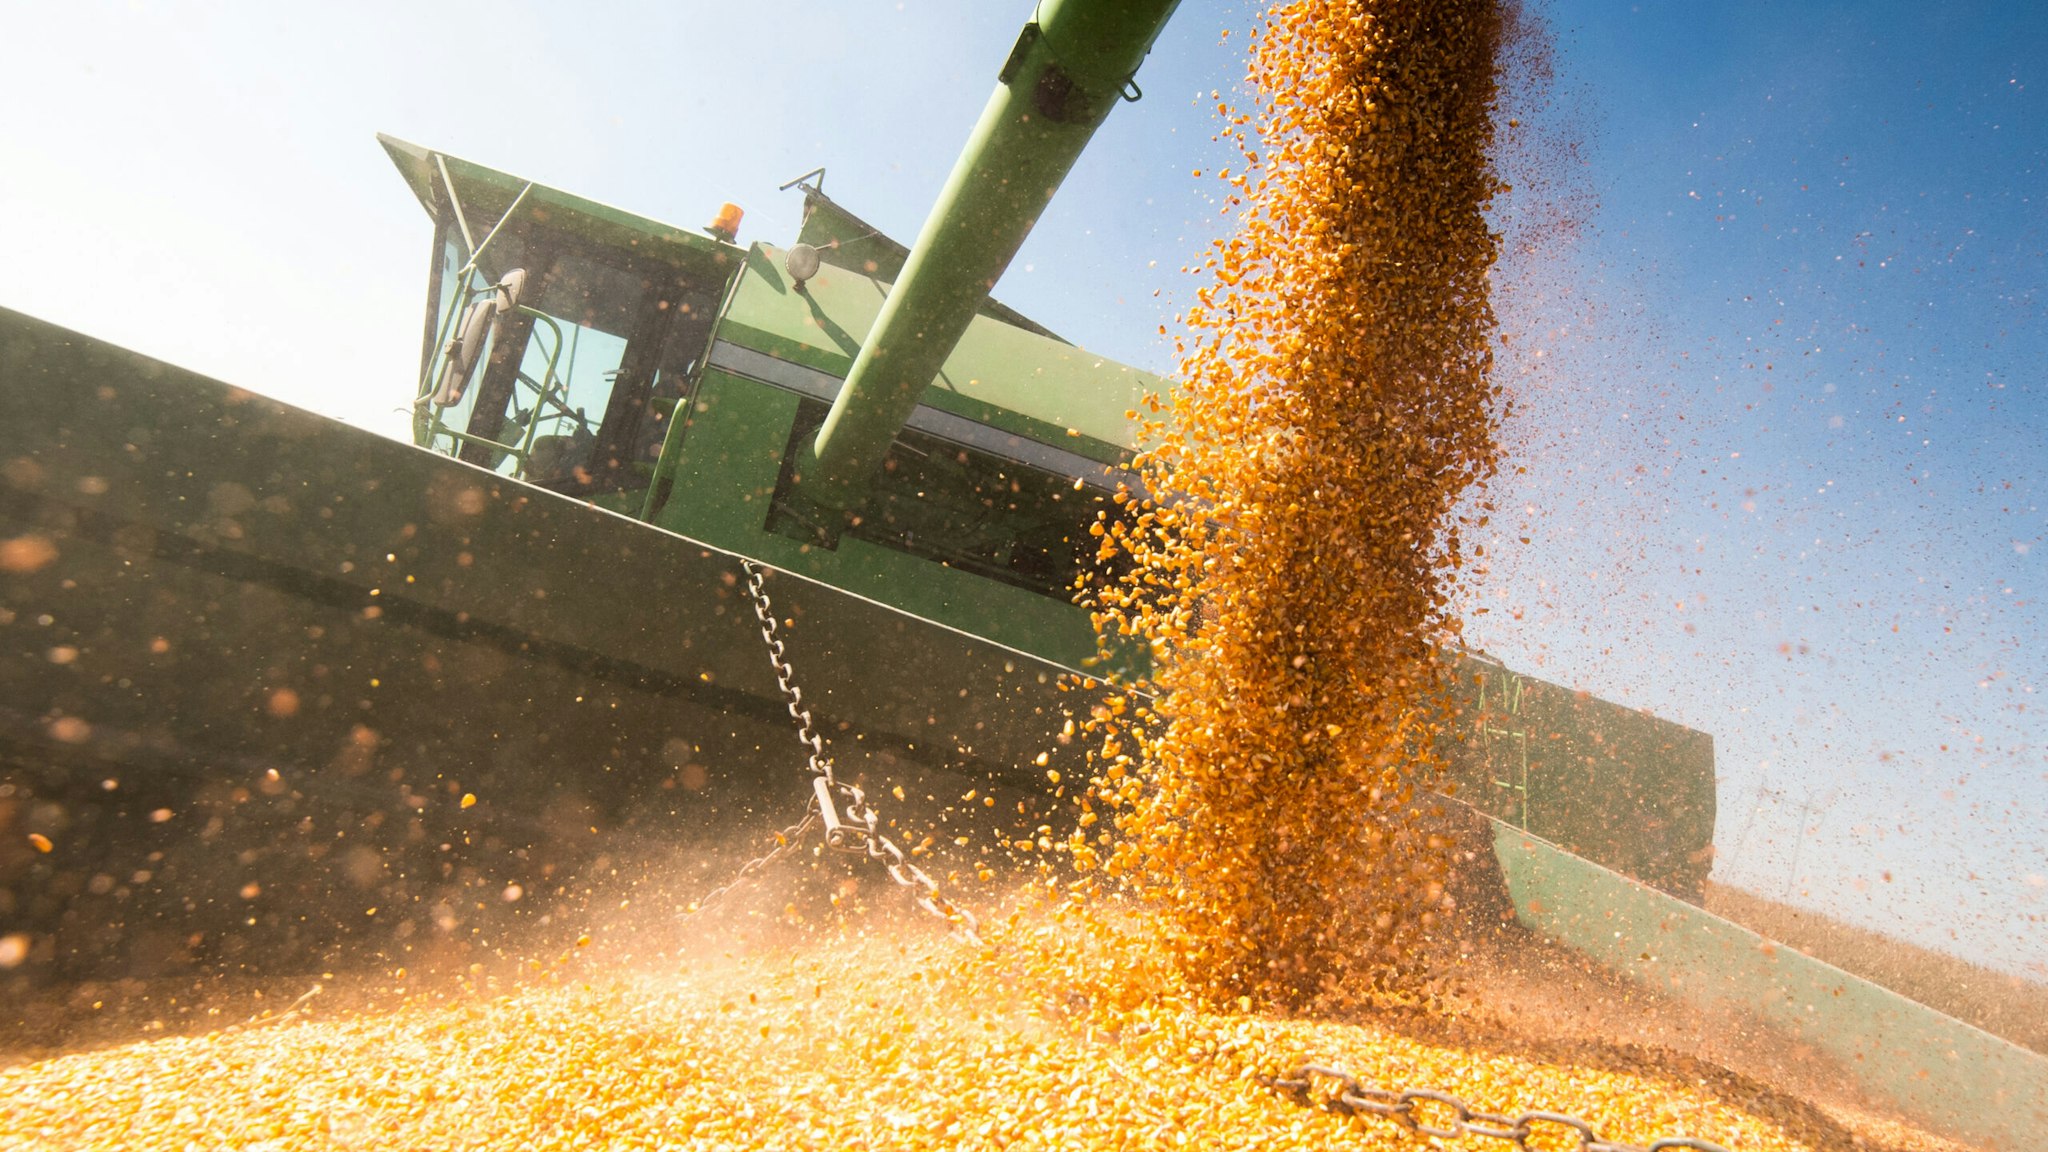 Pouring corn grain into tractor trailer after harvest at field